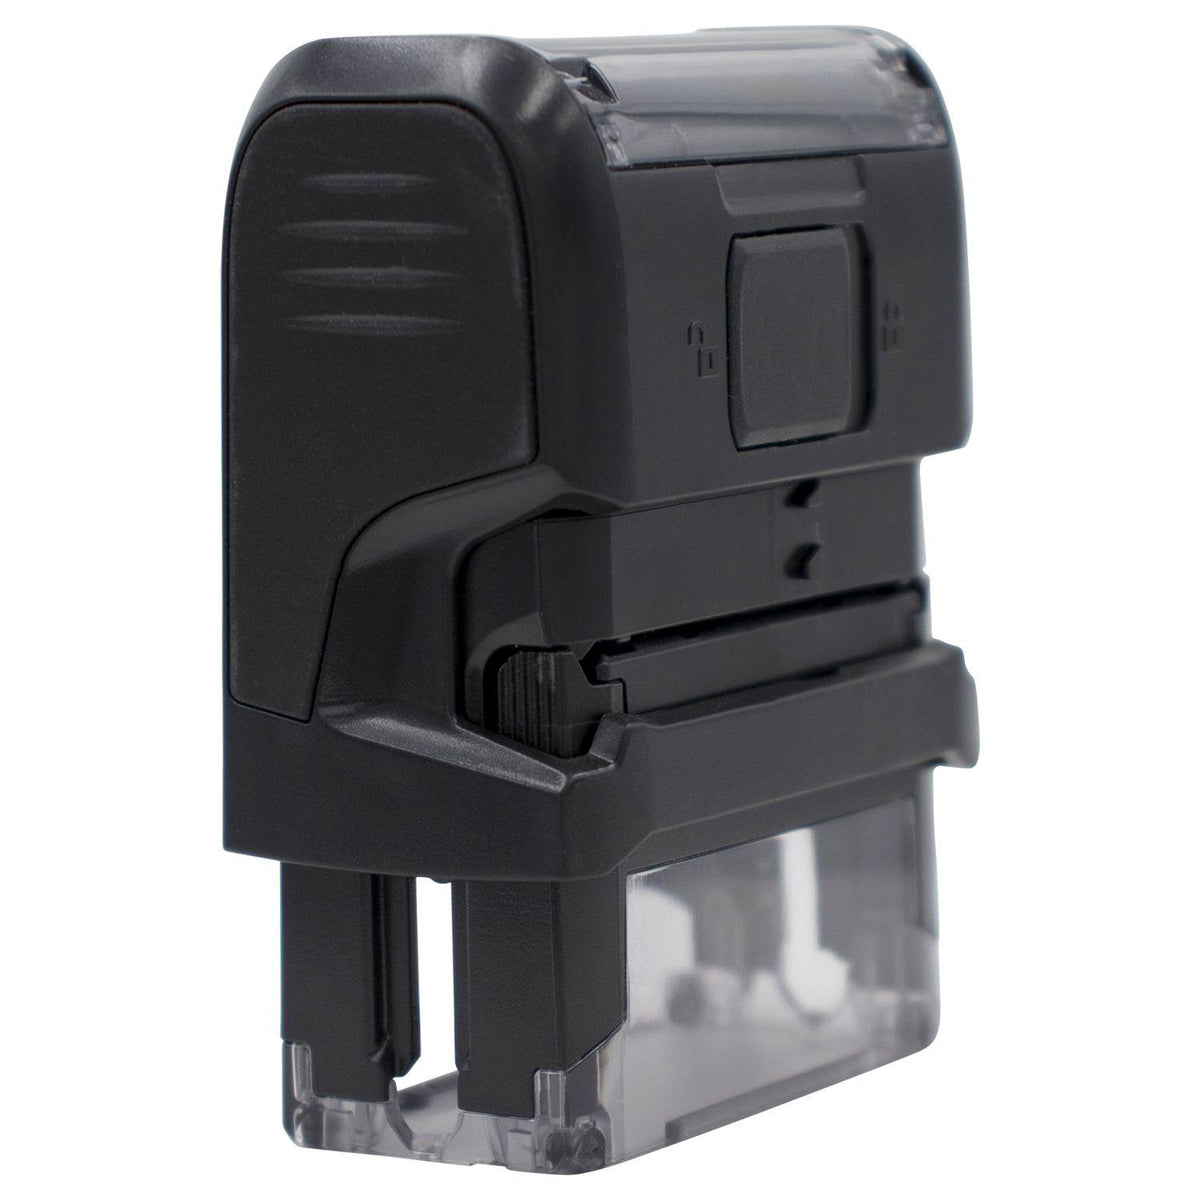 Large Self Inking Distributed Stamp With Line - Engineer Seal Stamps - Brand_Trodat, Impression Size_Large, Stamp Type_Self-Inking Stamp, Type of Use_Professional